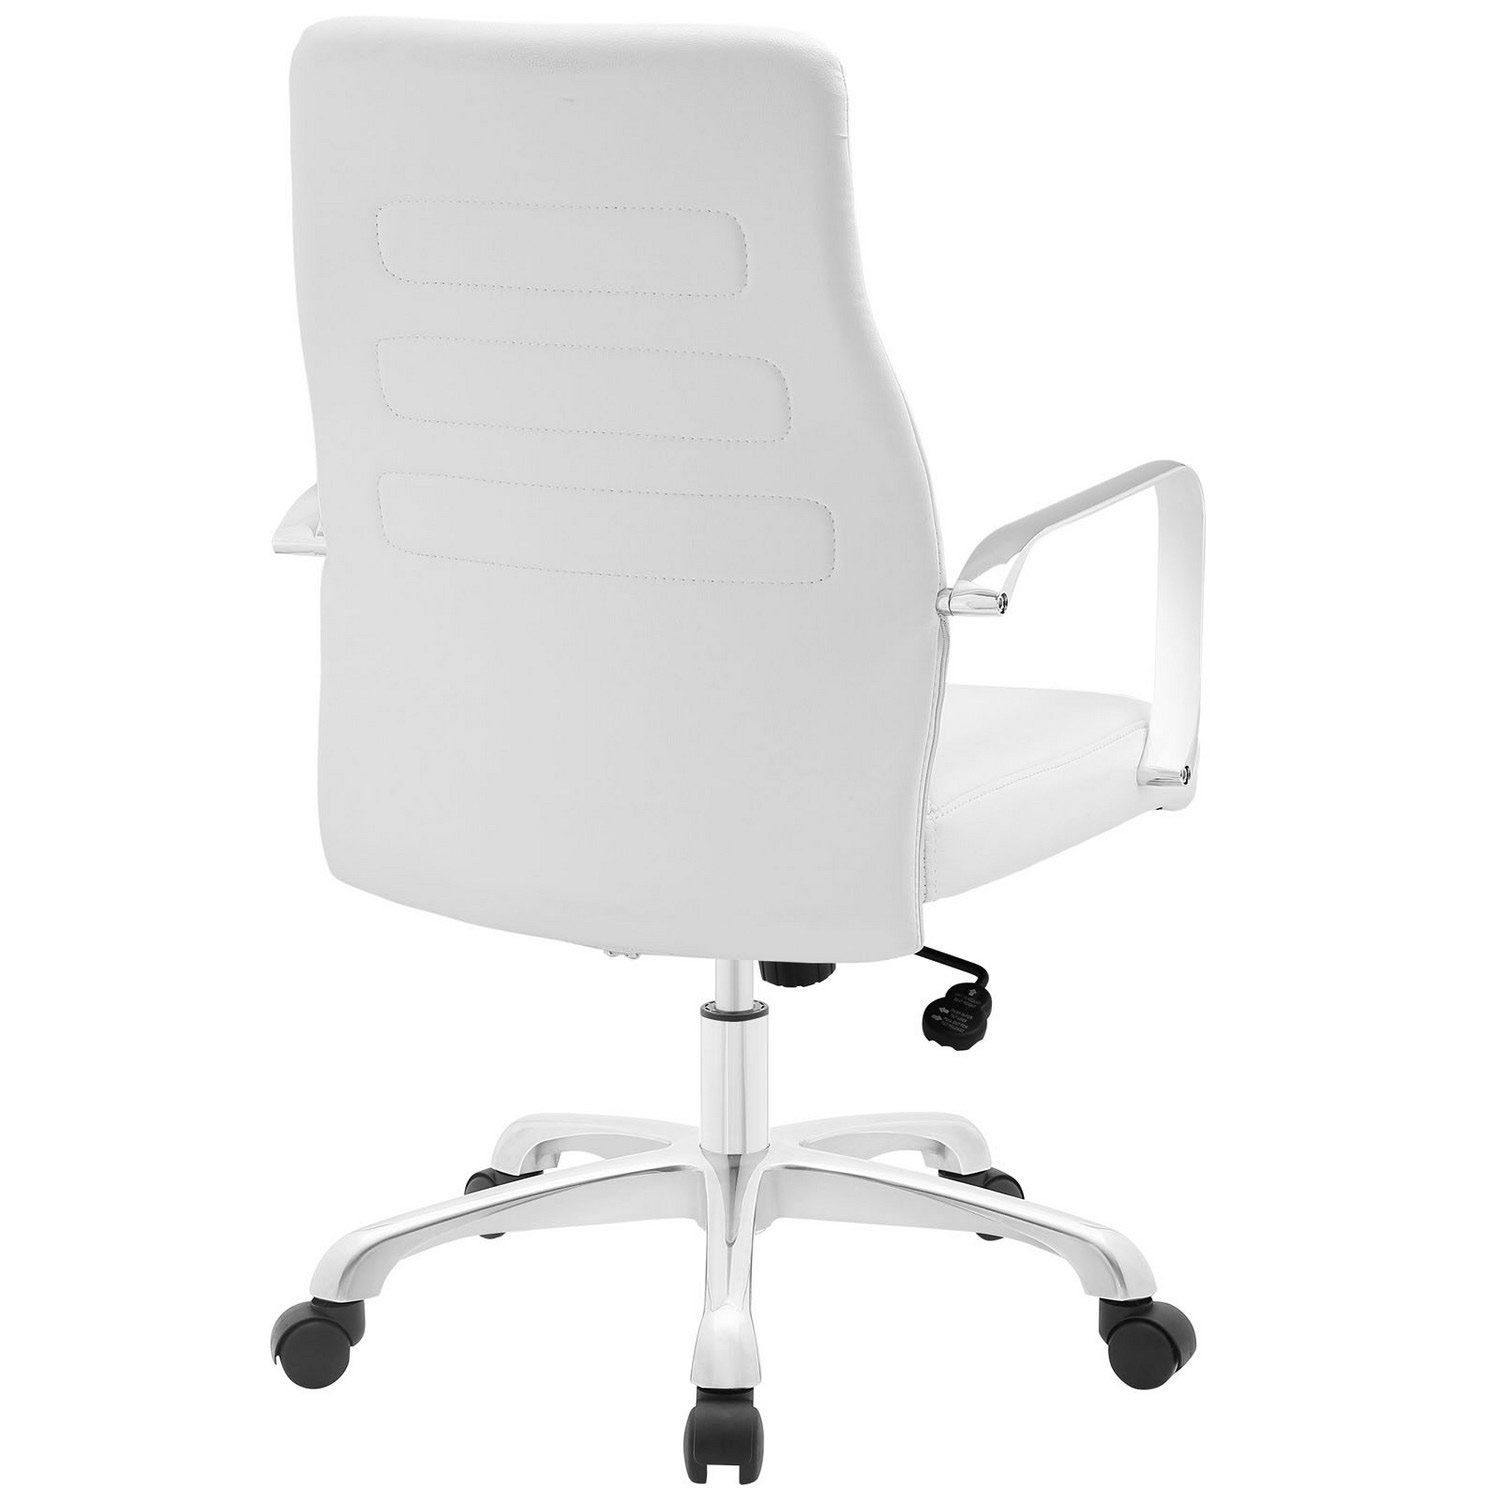 Modway Depict Mid Back Aluminum Office Chair - White